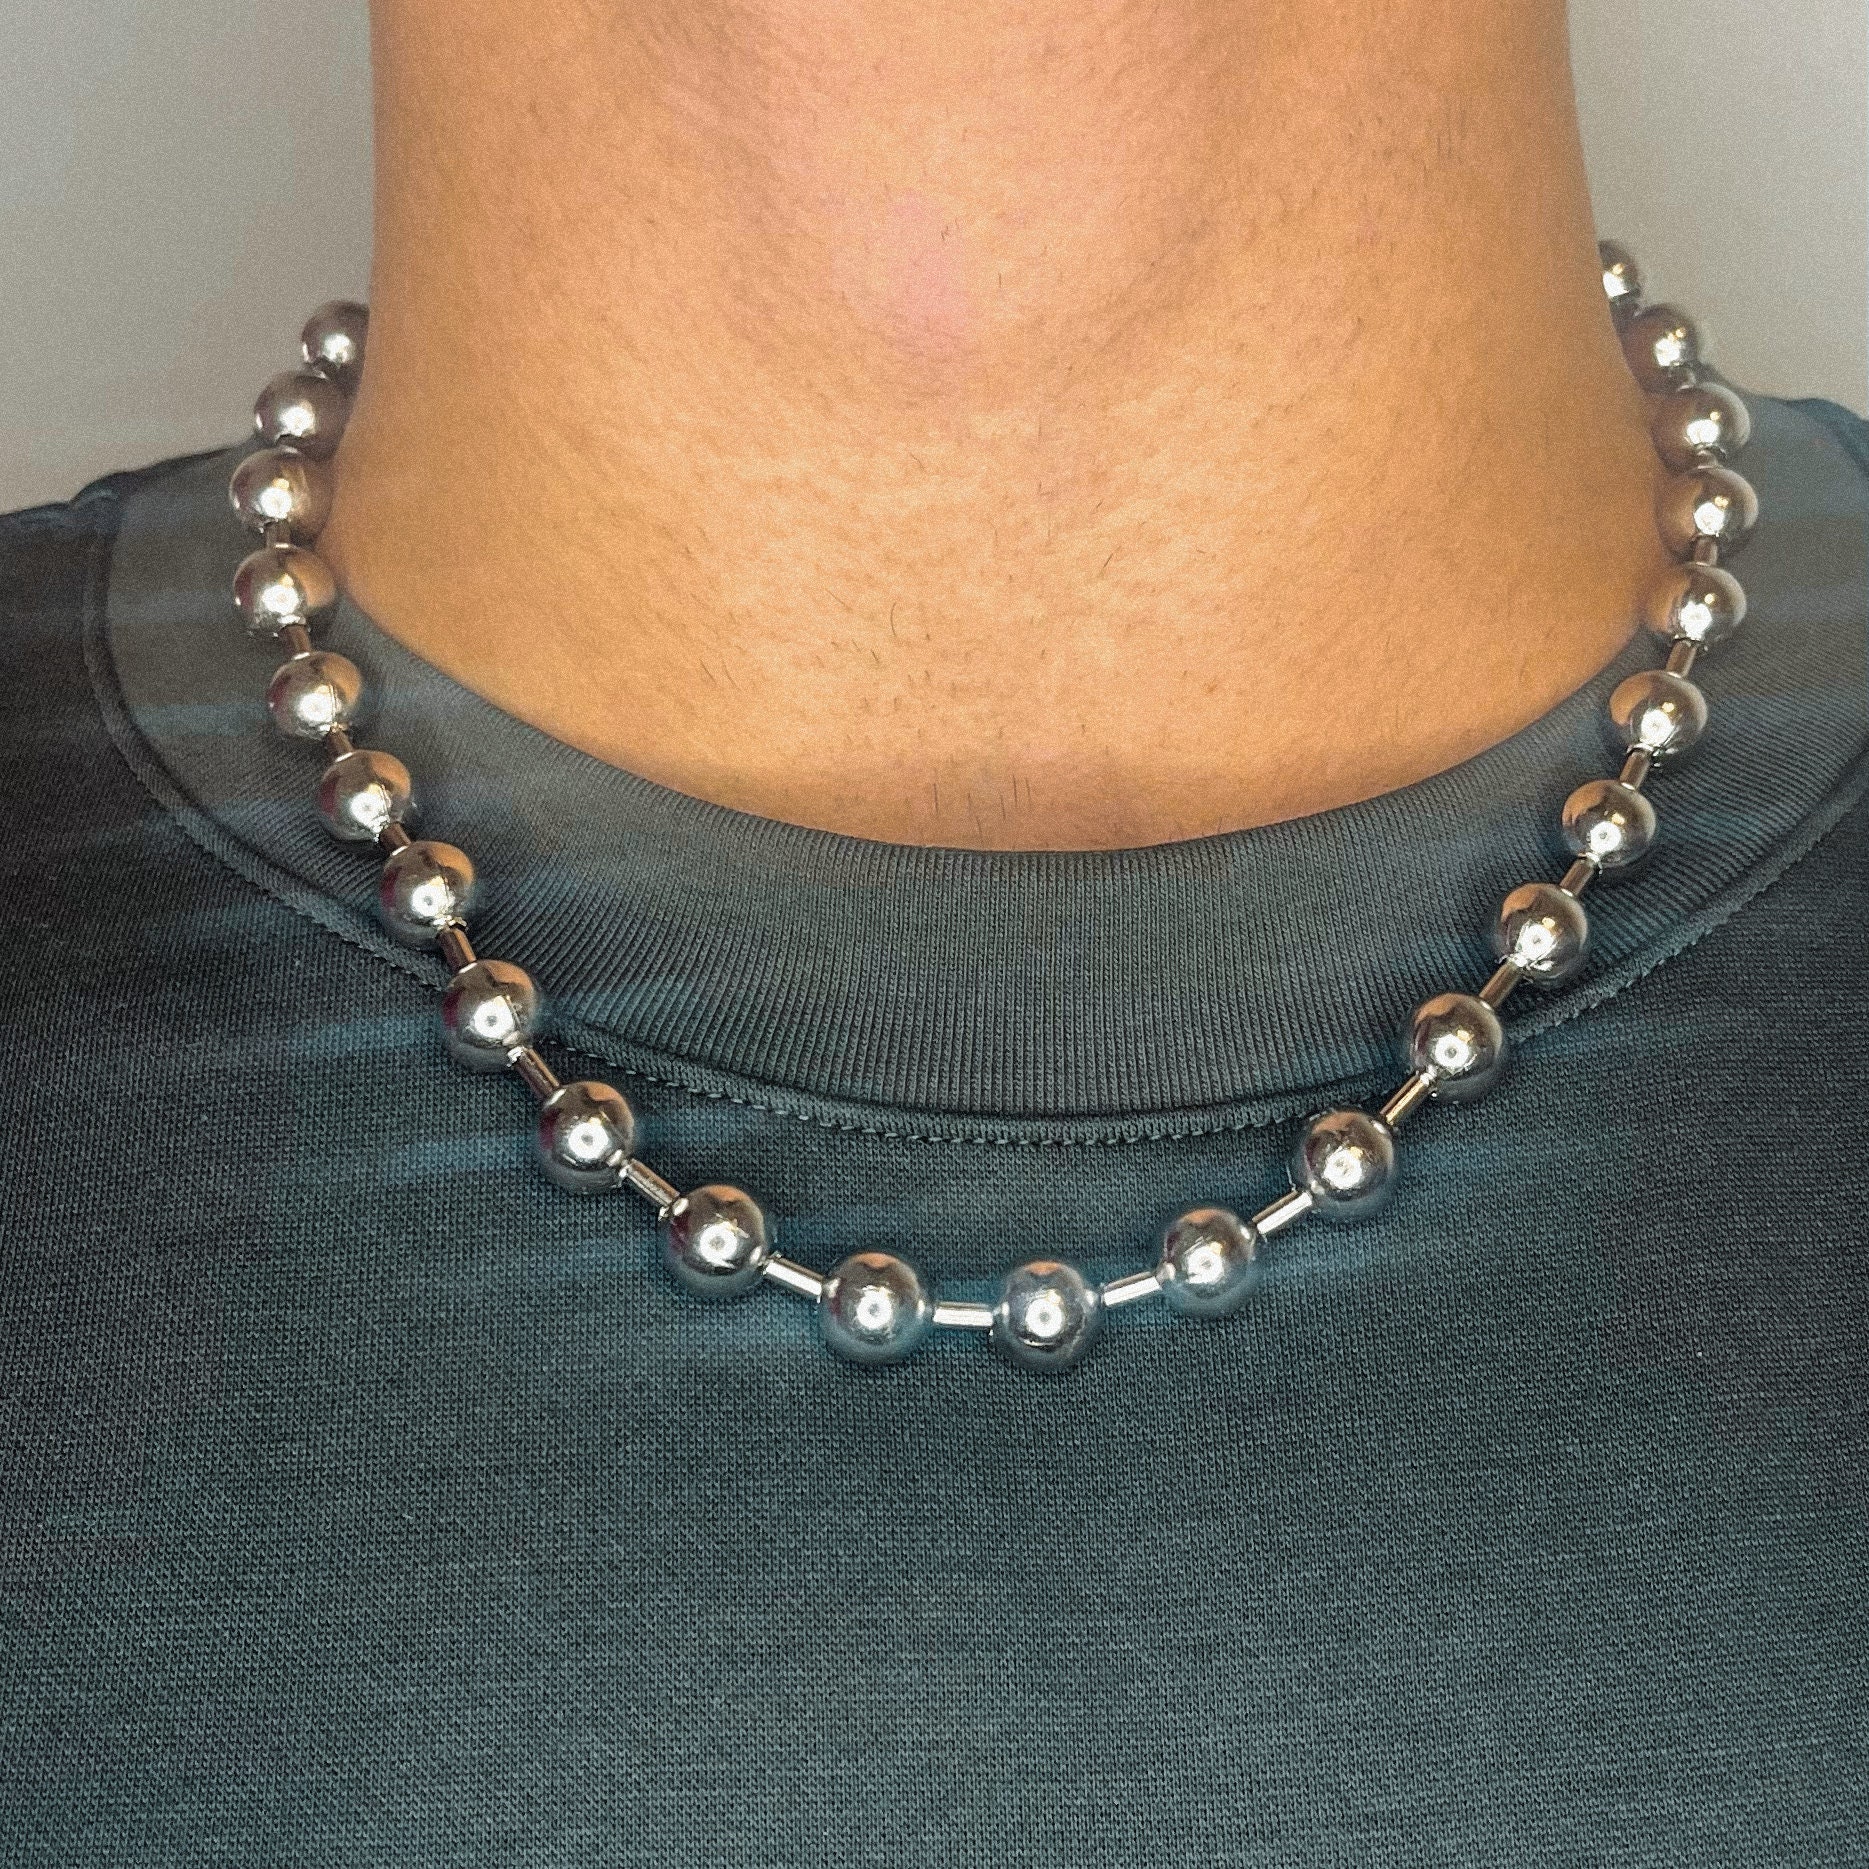 EconoCrafts: Stainless Steel Ball Chain Necklace 18